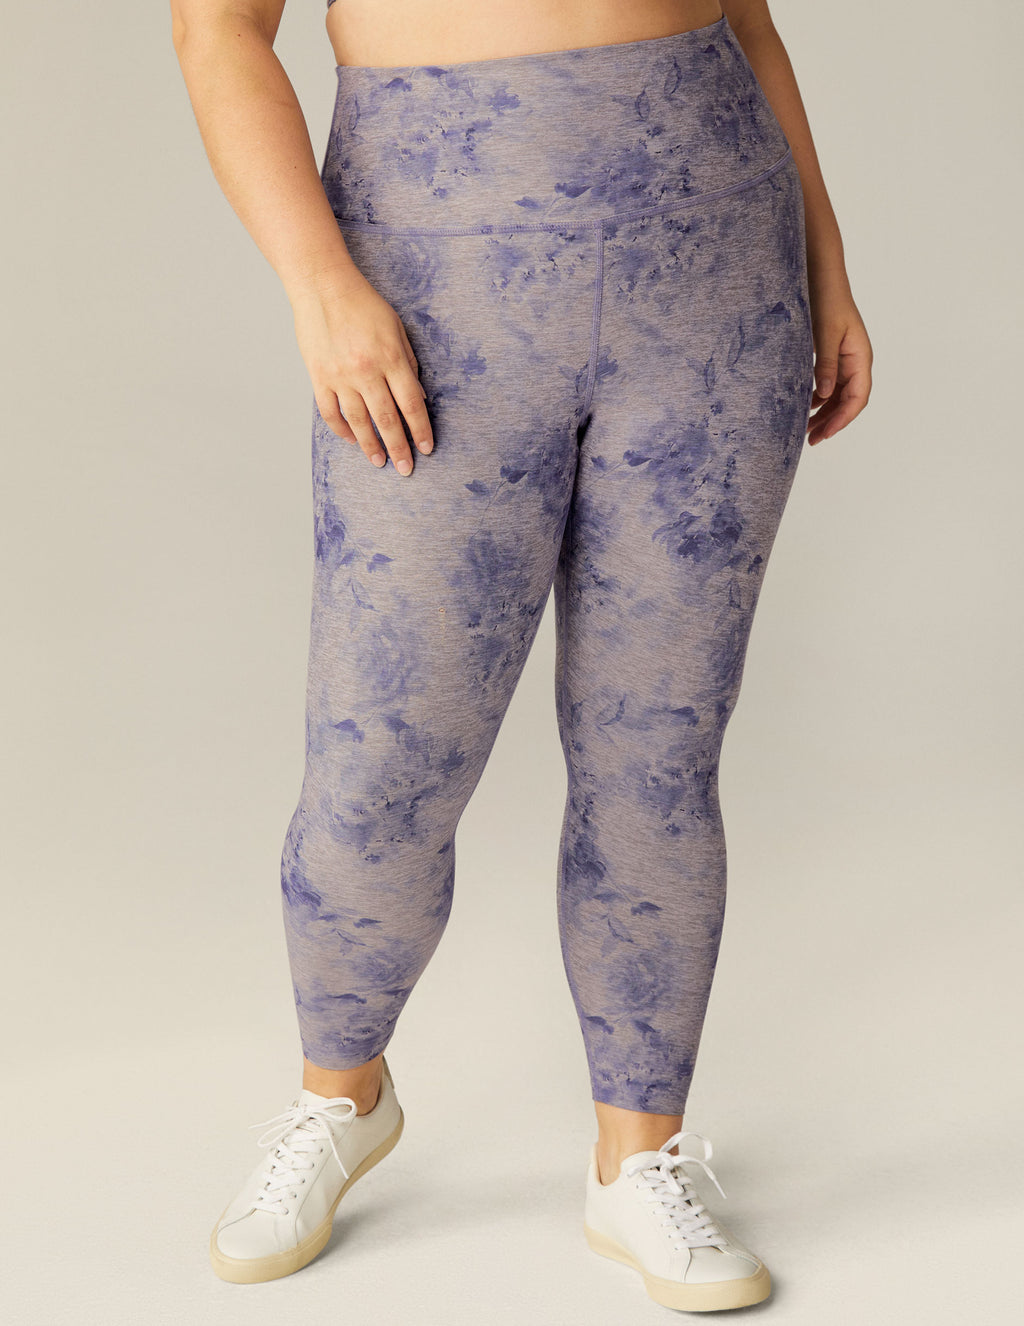 Underwater Floral SoftMark High Waisted Midi Legging Featured Image